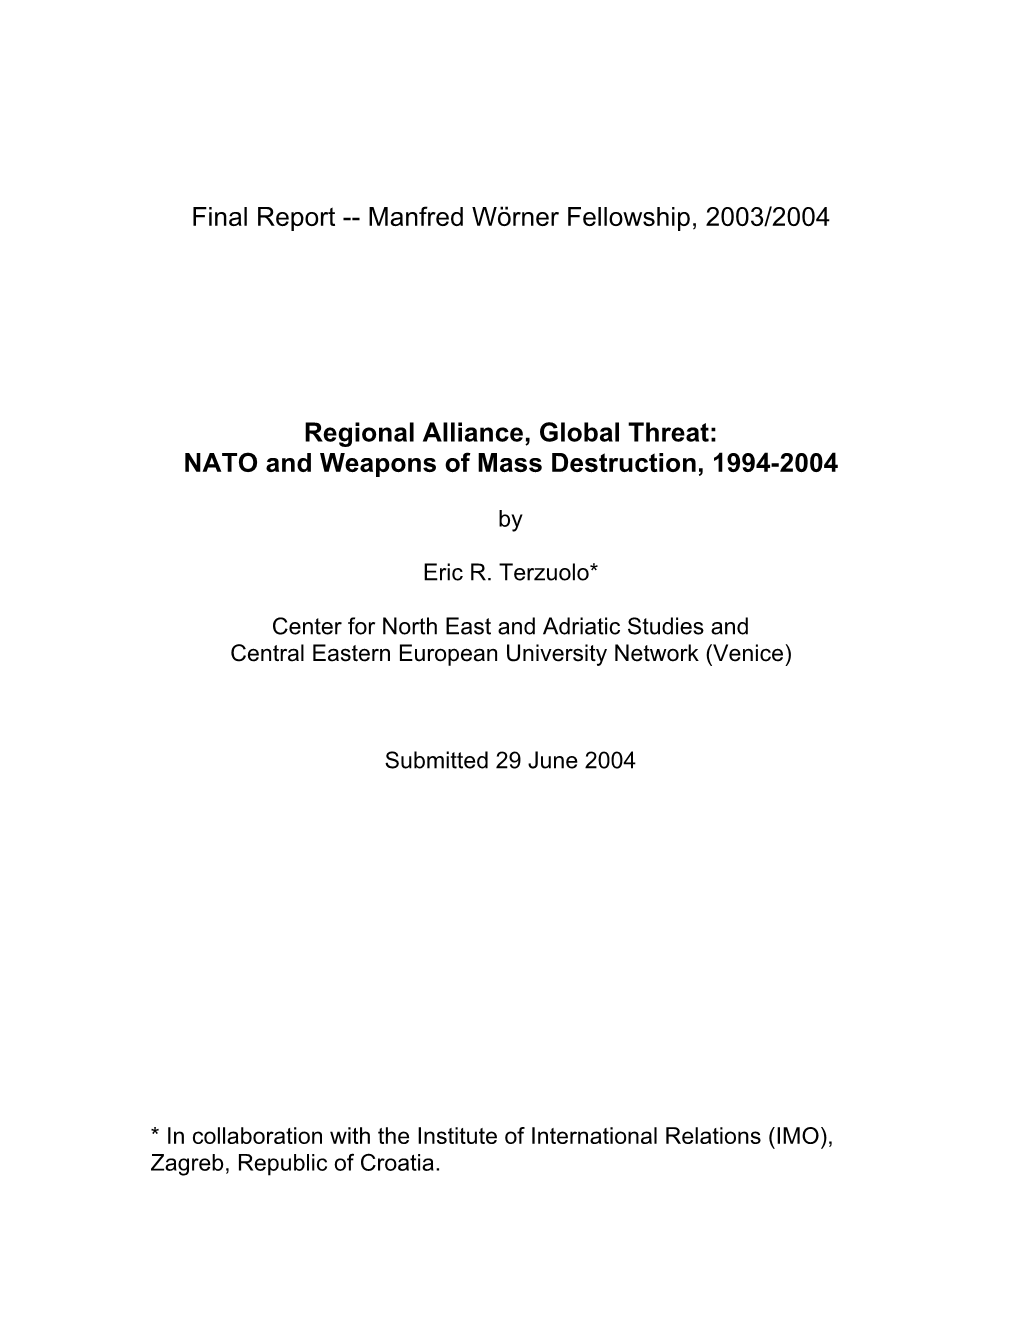 NATO and Weapons of Mass Destruction, 1994-2004